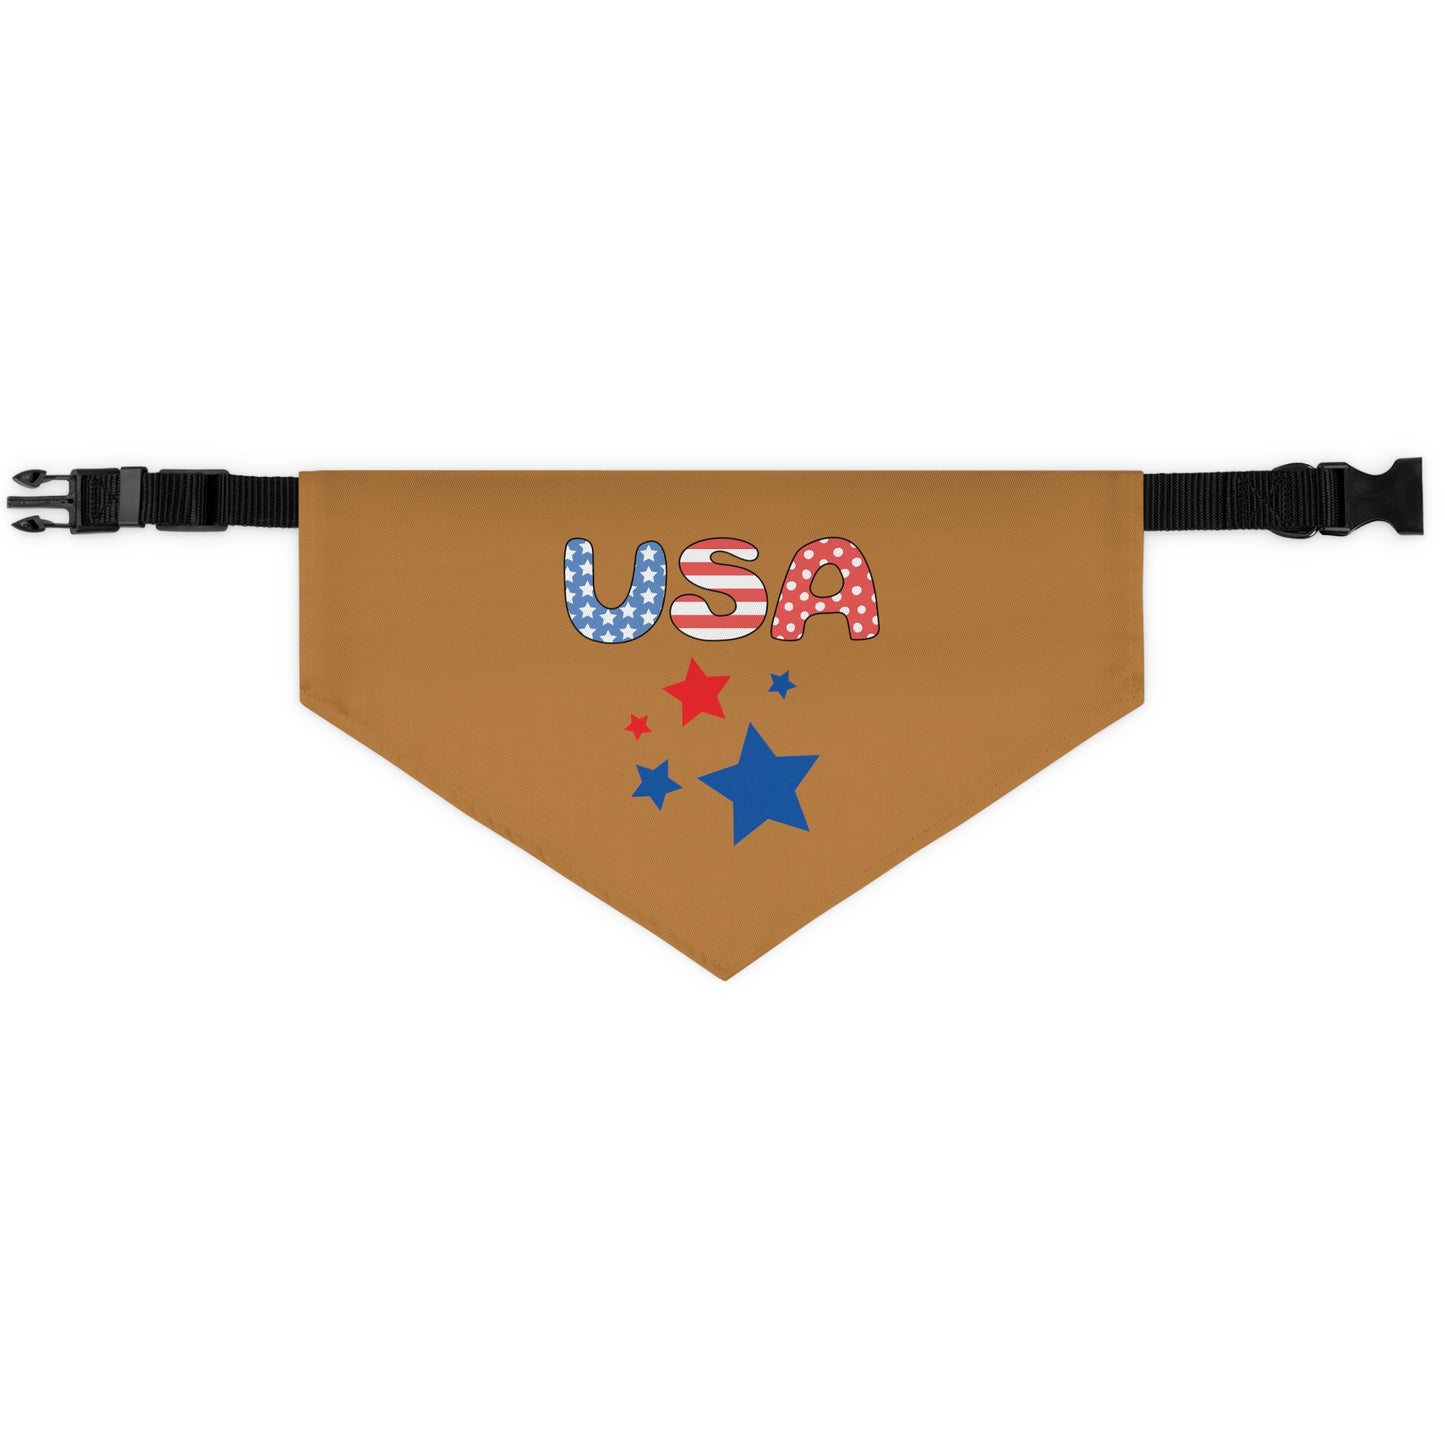 Flat front view of the large bandana collar